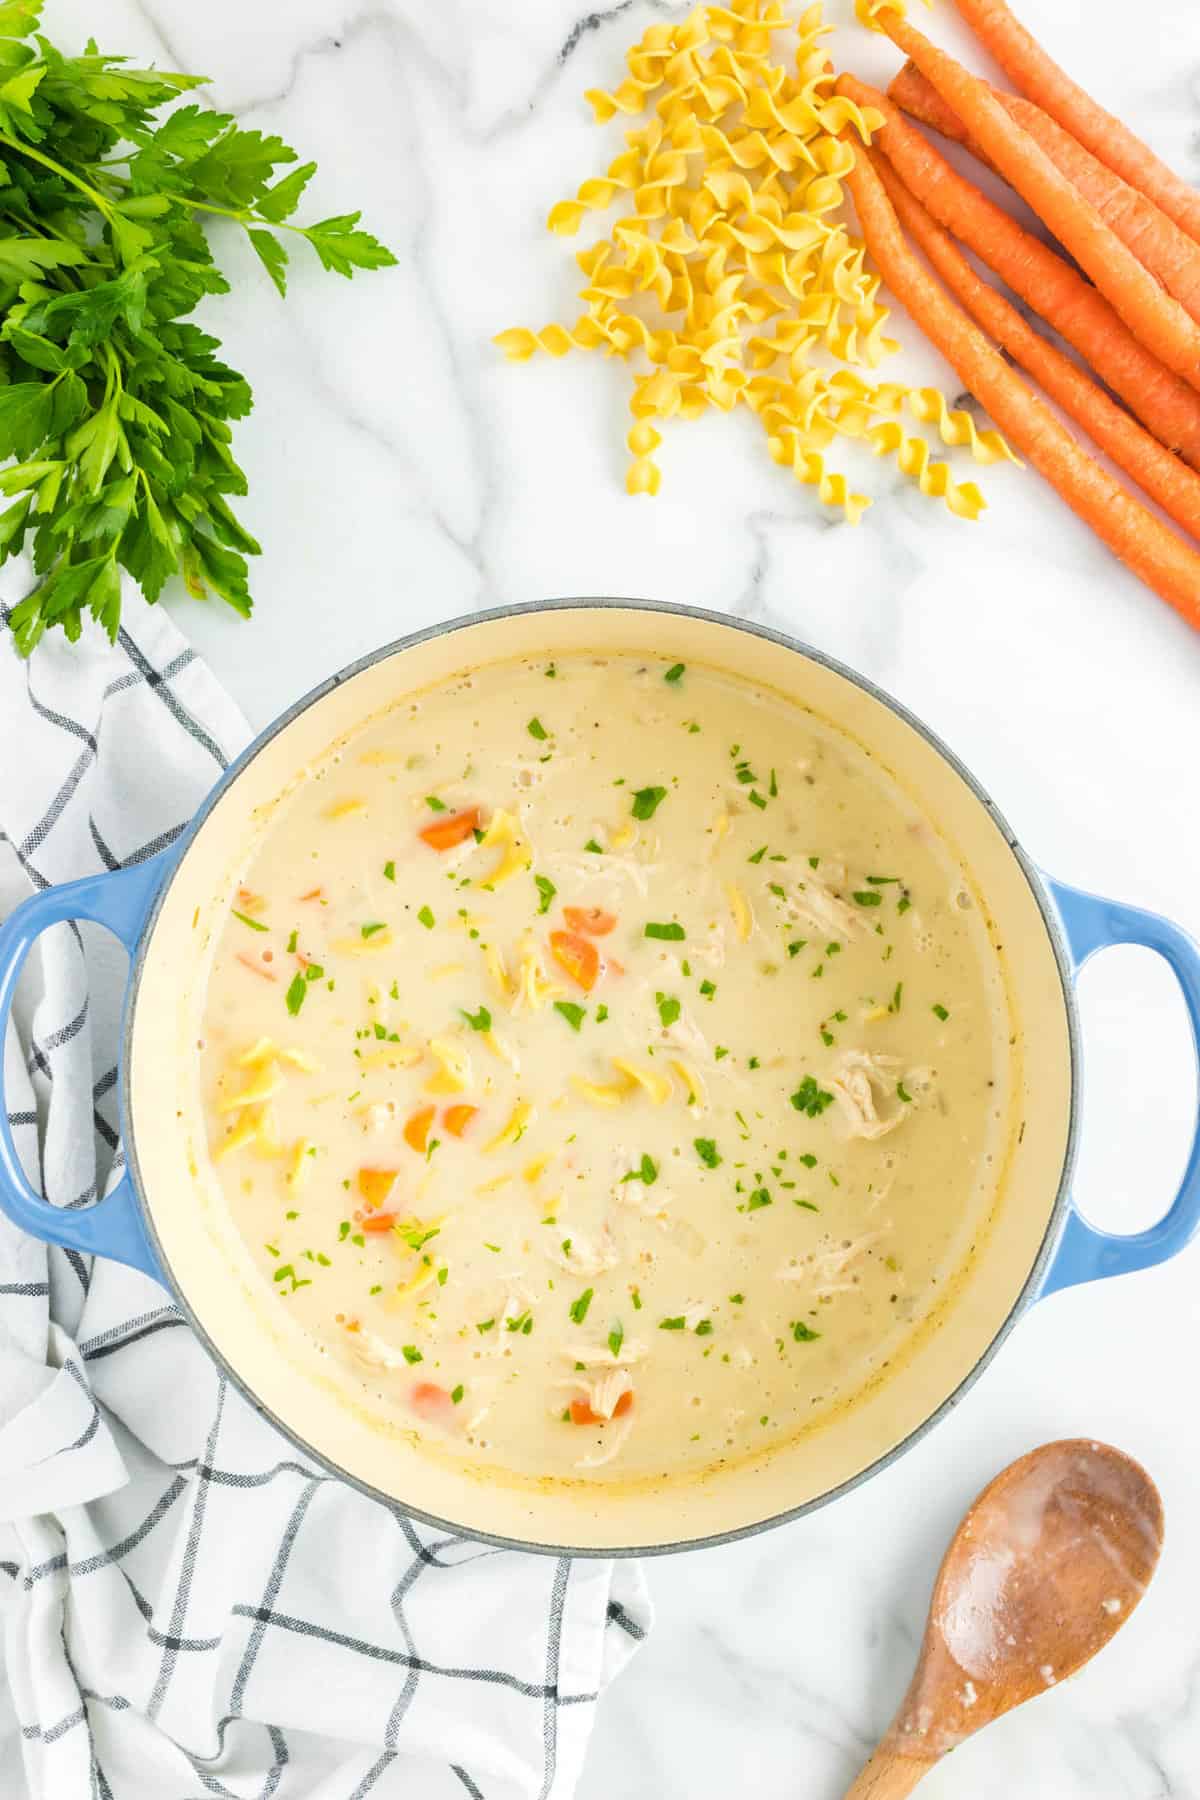 Creamy Chicken Noodle Soup Recipe in Stock Pot Ready to Enjoy